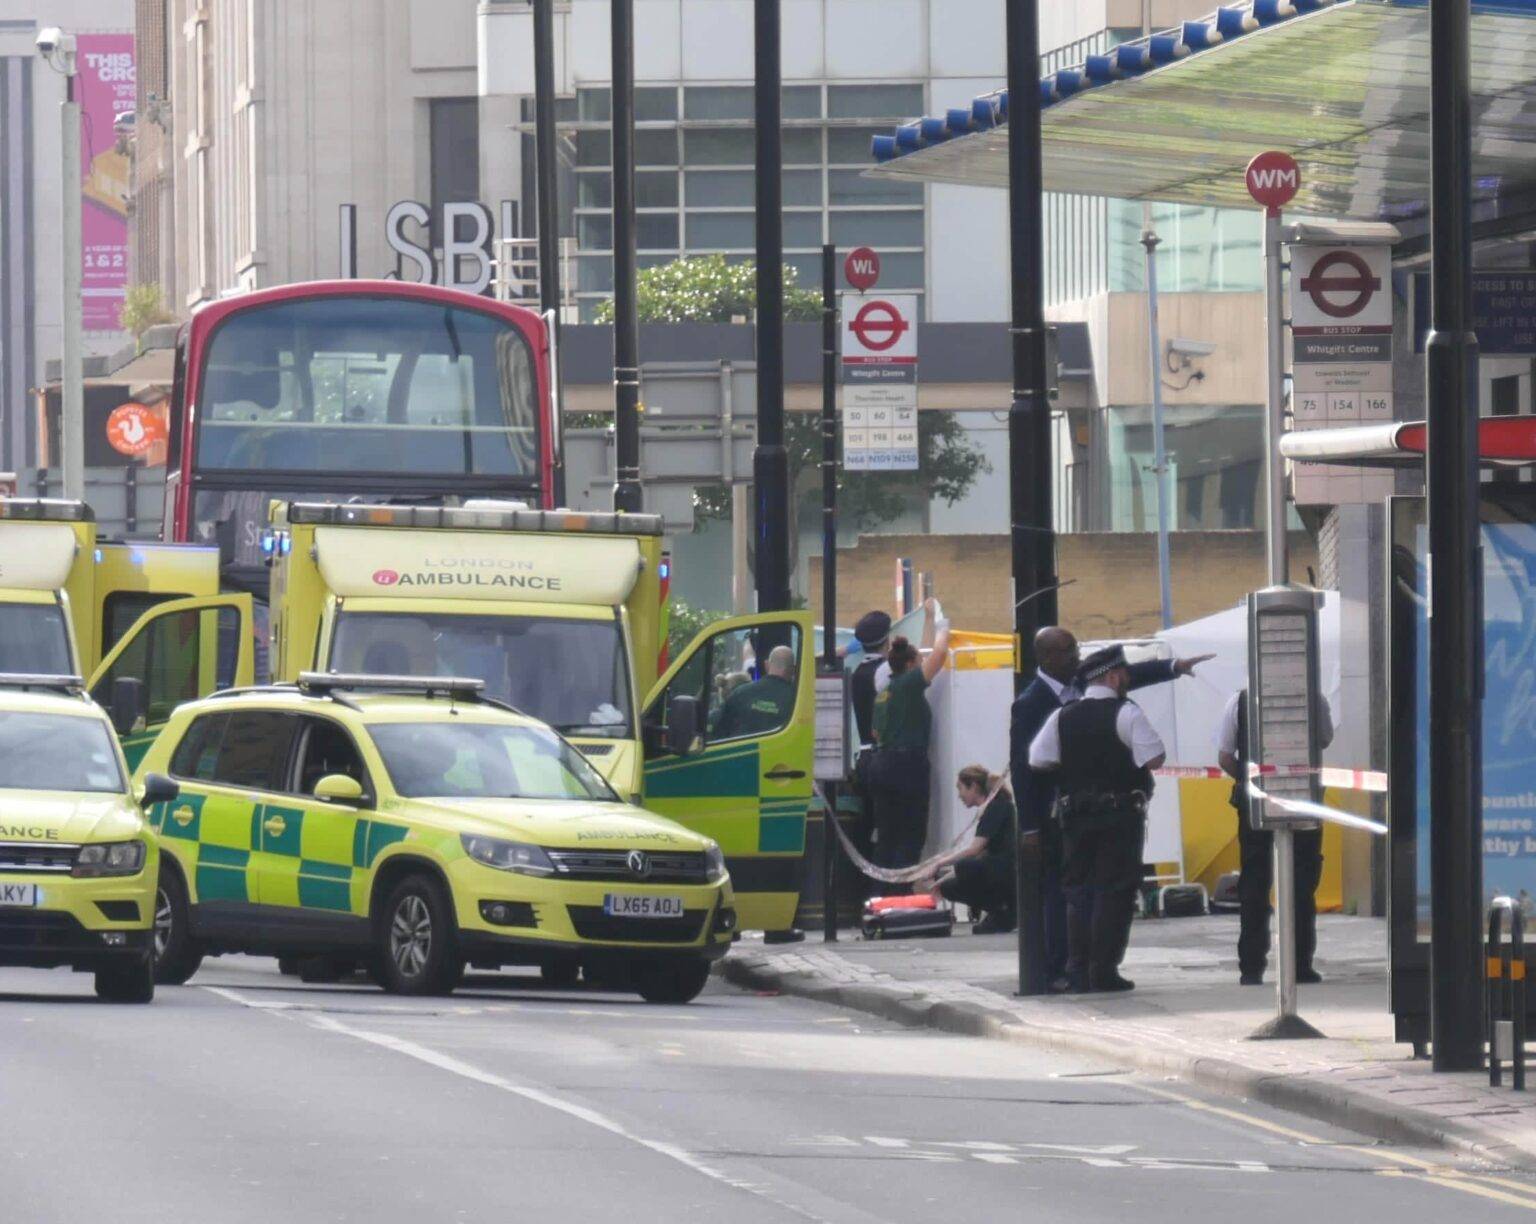 girl stabbed to death on bus in Croydon